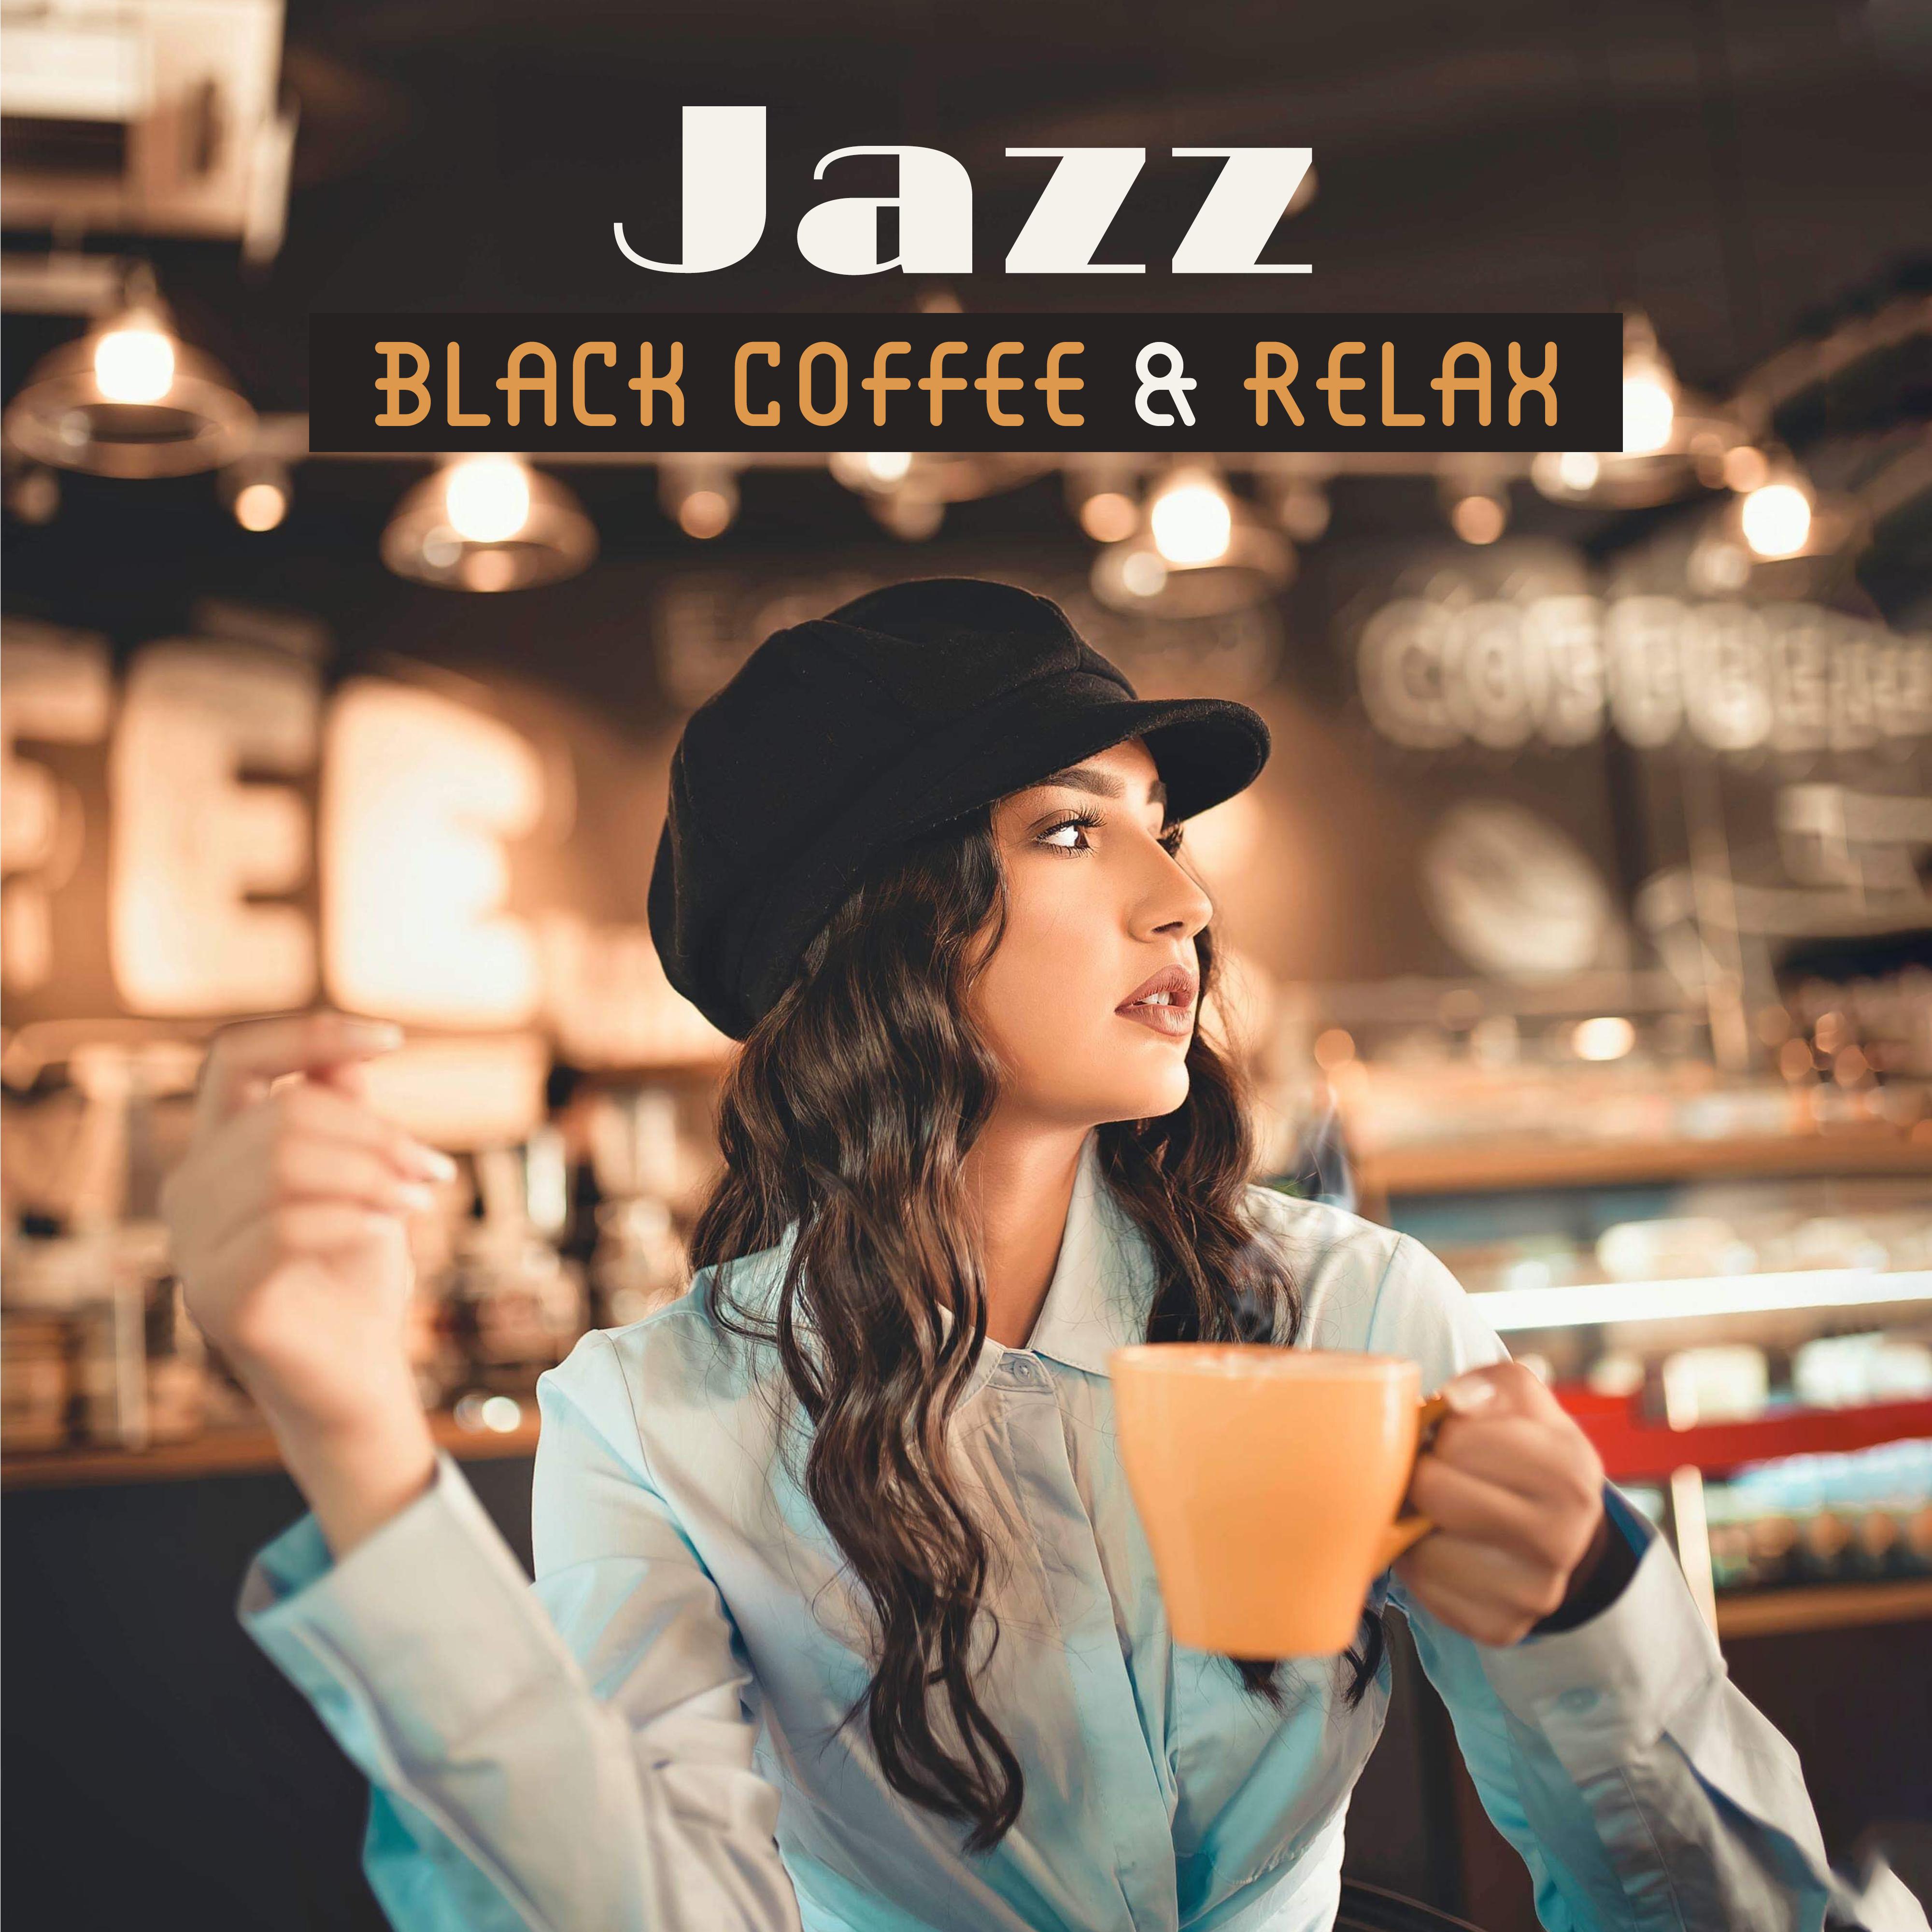 Jazz, Black Coffee & Relax: 2019 Smooth Jazz Music for Relaxation, Joyful Rhythms to Calm Down, Stress Relief, Rest After Long Day